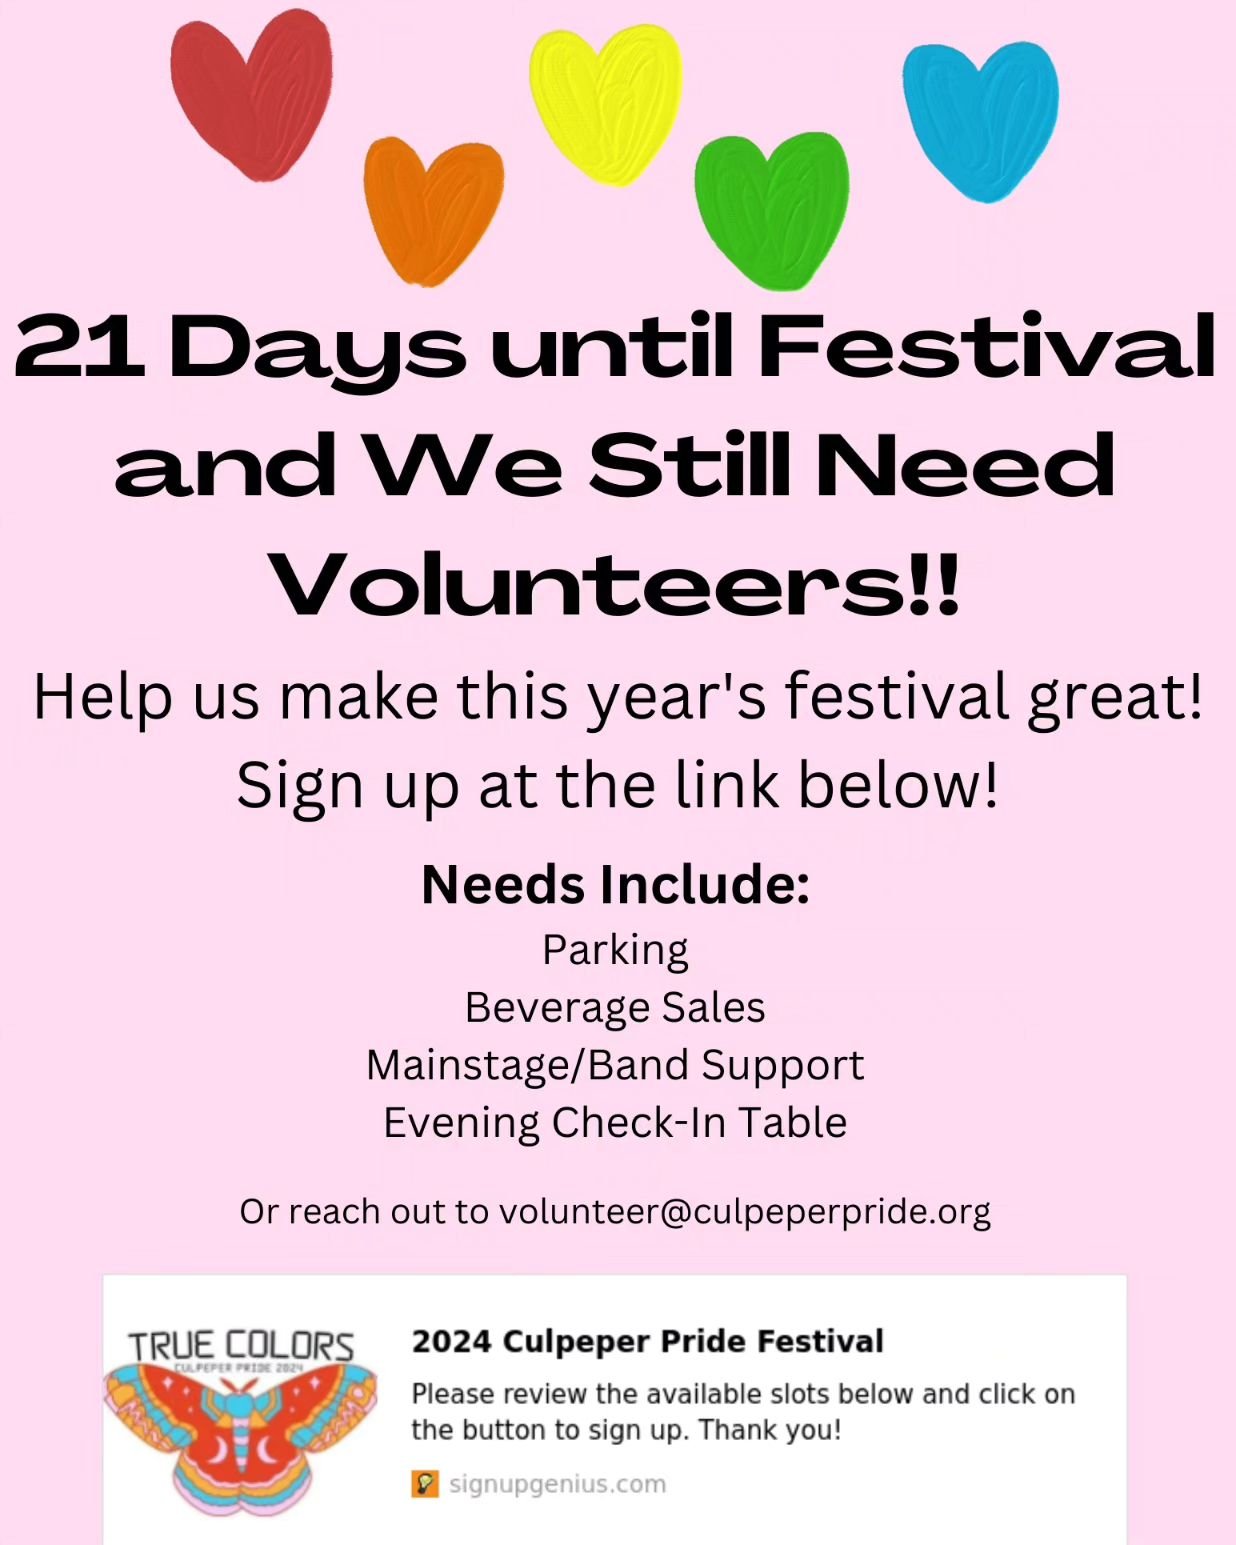 Culpeper Pride STILL needs YOU! Sign up to volunteer for the 2024 Culpeper Pride Festival now at the link below! ✨️💖🌈

https://www.signupgenius.com/go/10C0B4AAAA922A0FDCE9-49461374-2024